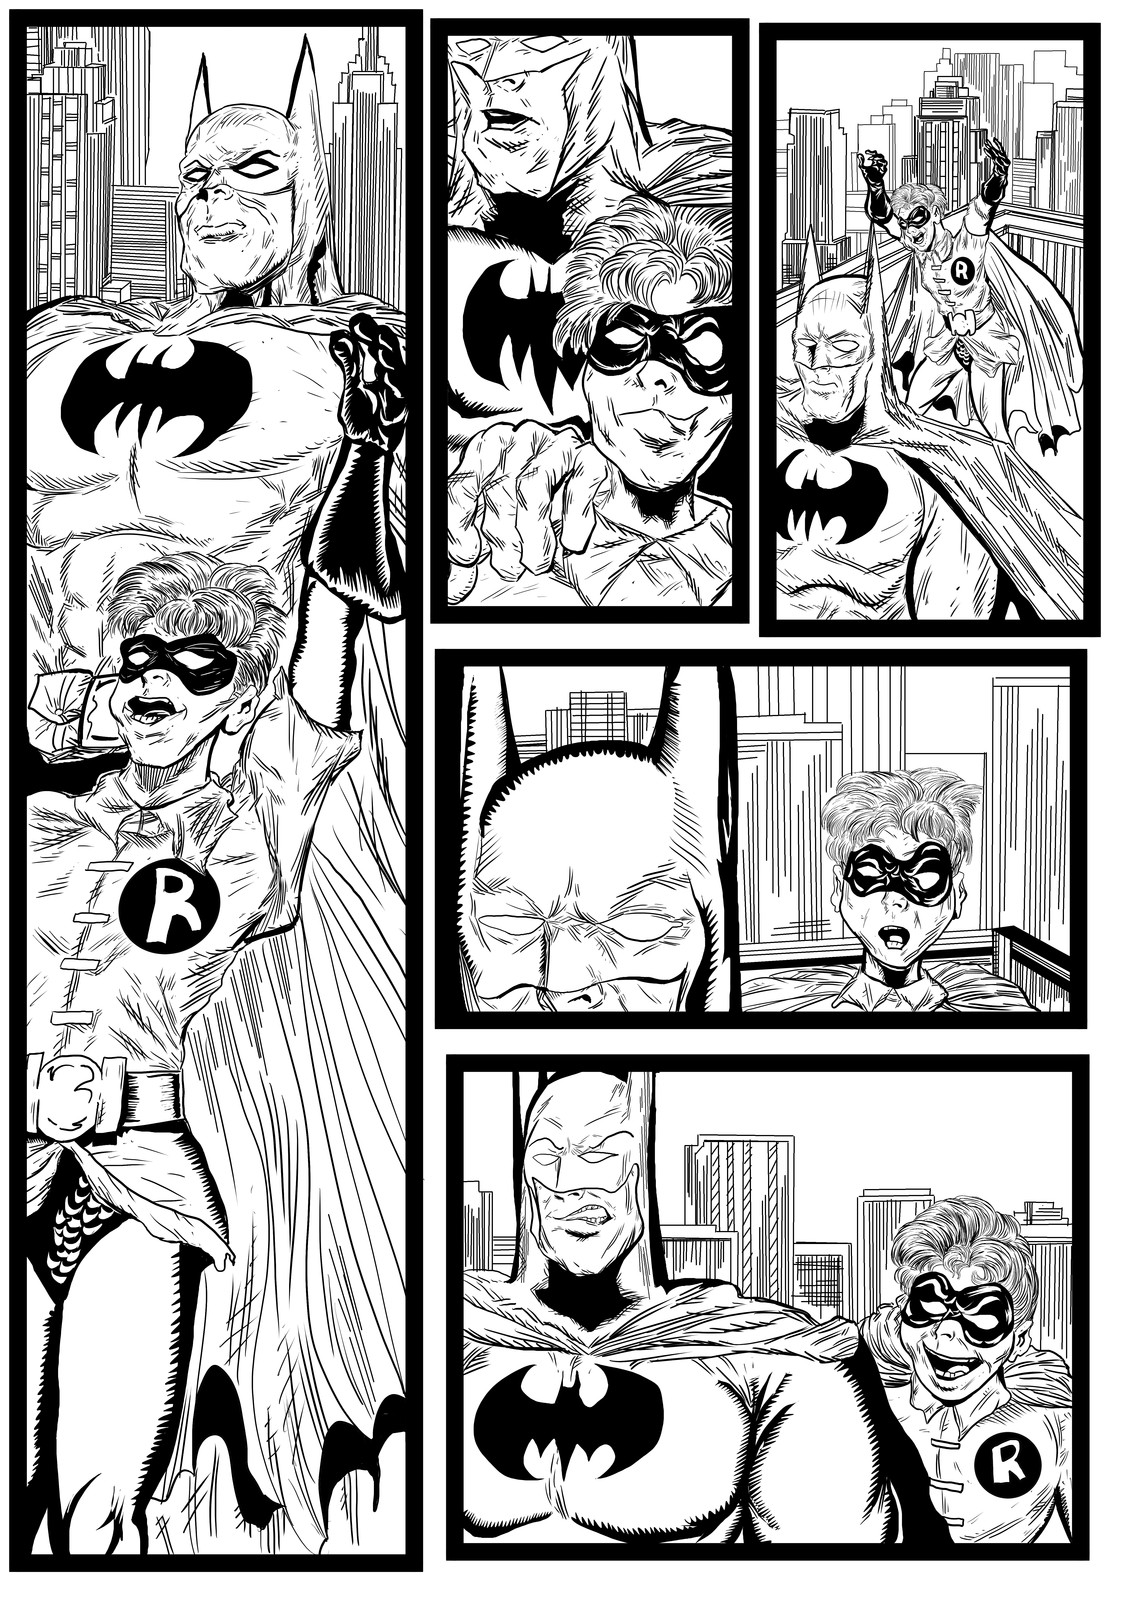 Batman and Robin sequential artwork page 2-2017 by Brian Robinson